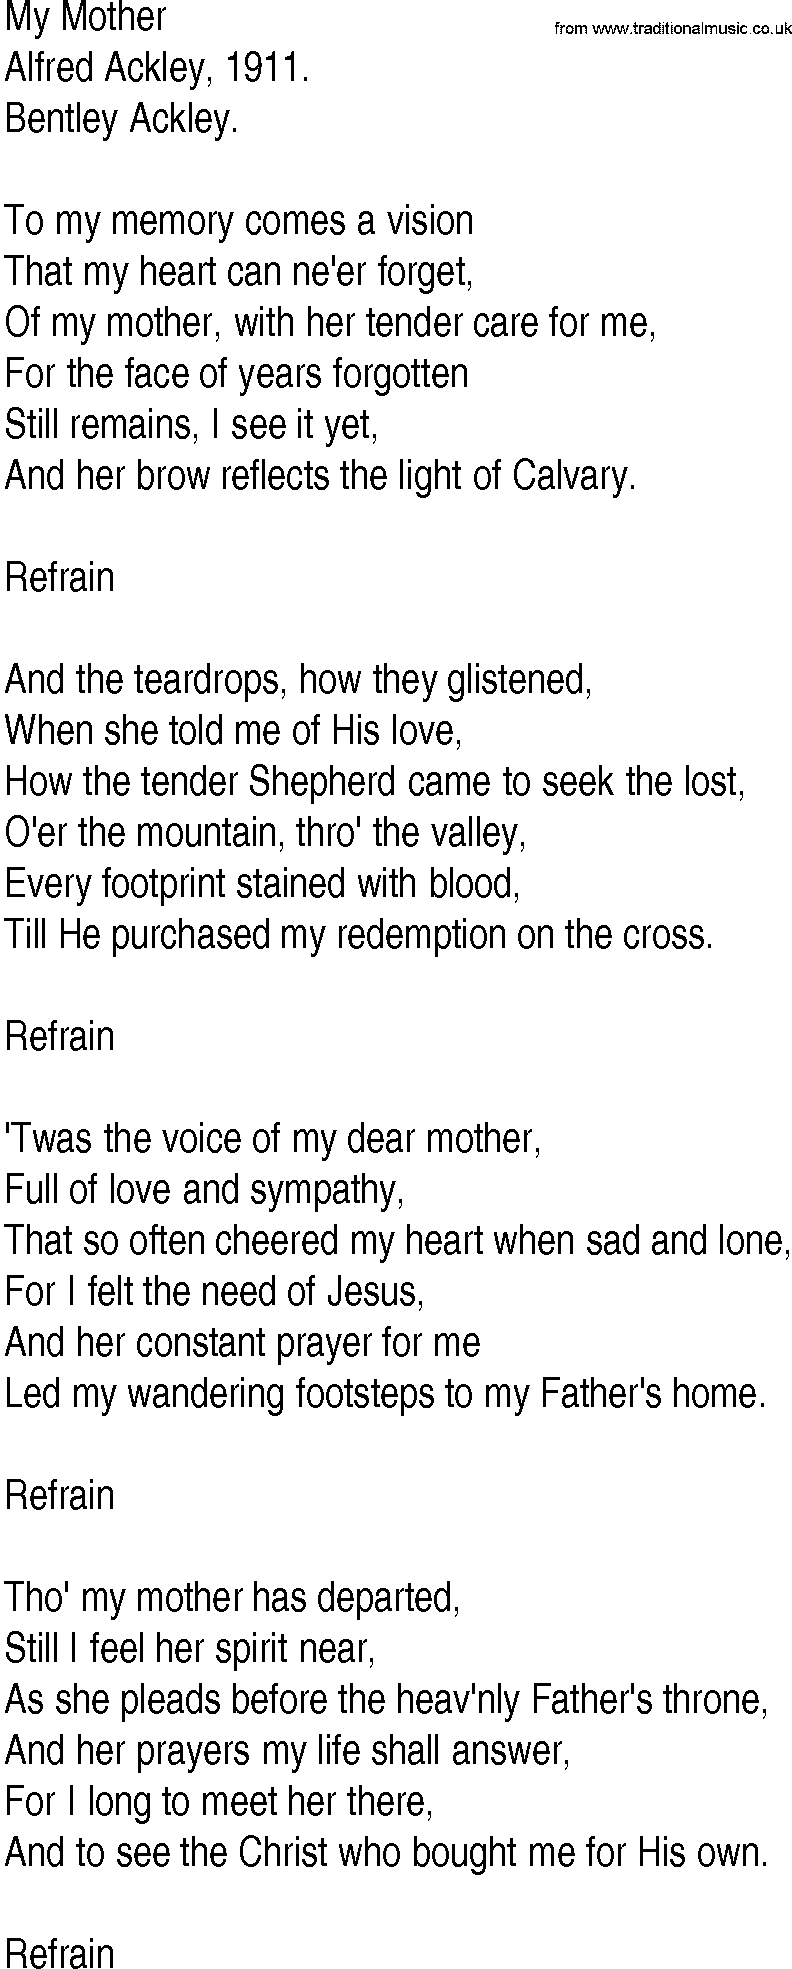 Hymn and Gospel Song: My Mother by Alfred Ackley lyrics